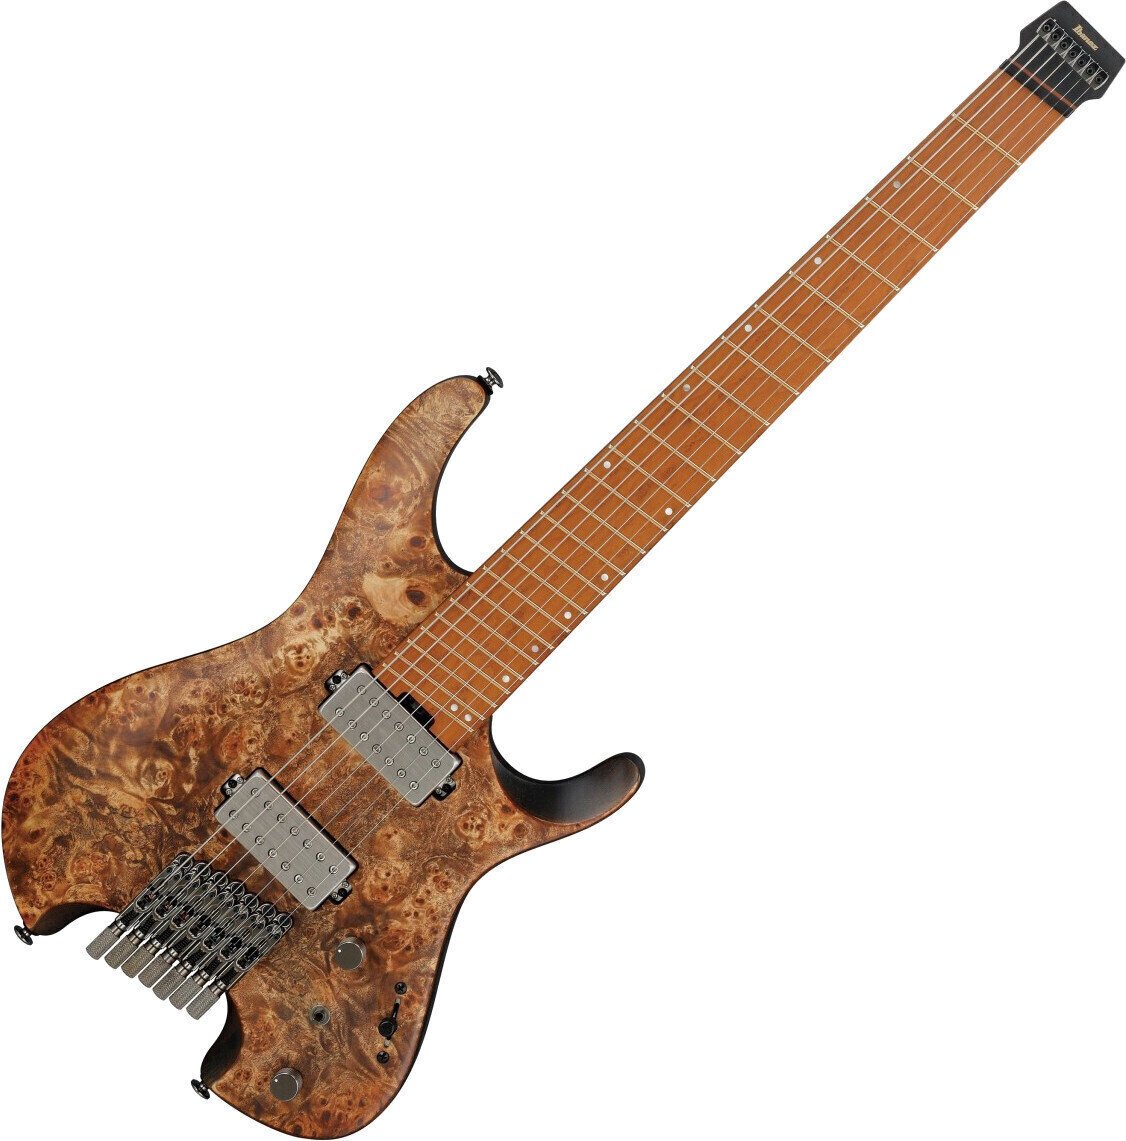 Headless kytara Ibanez QX527PB-ABS Antique Brown Stained